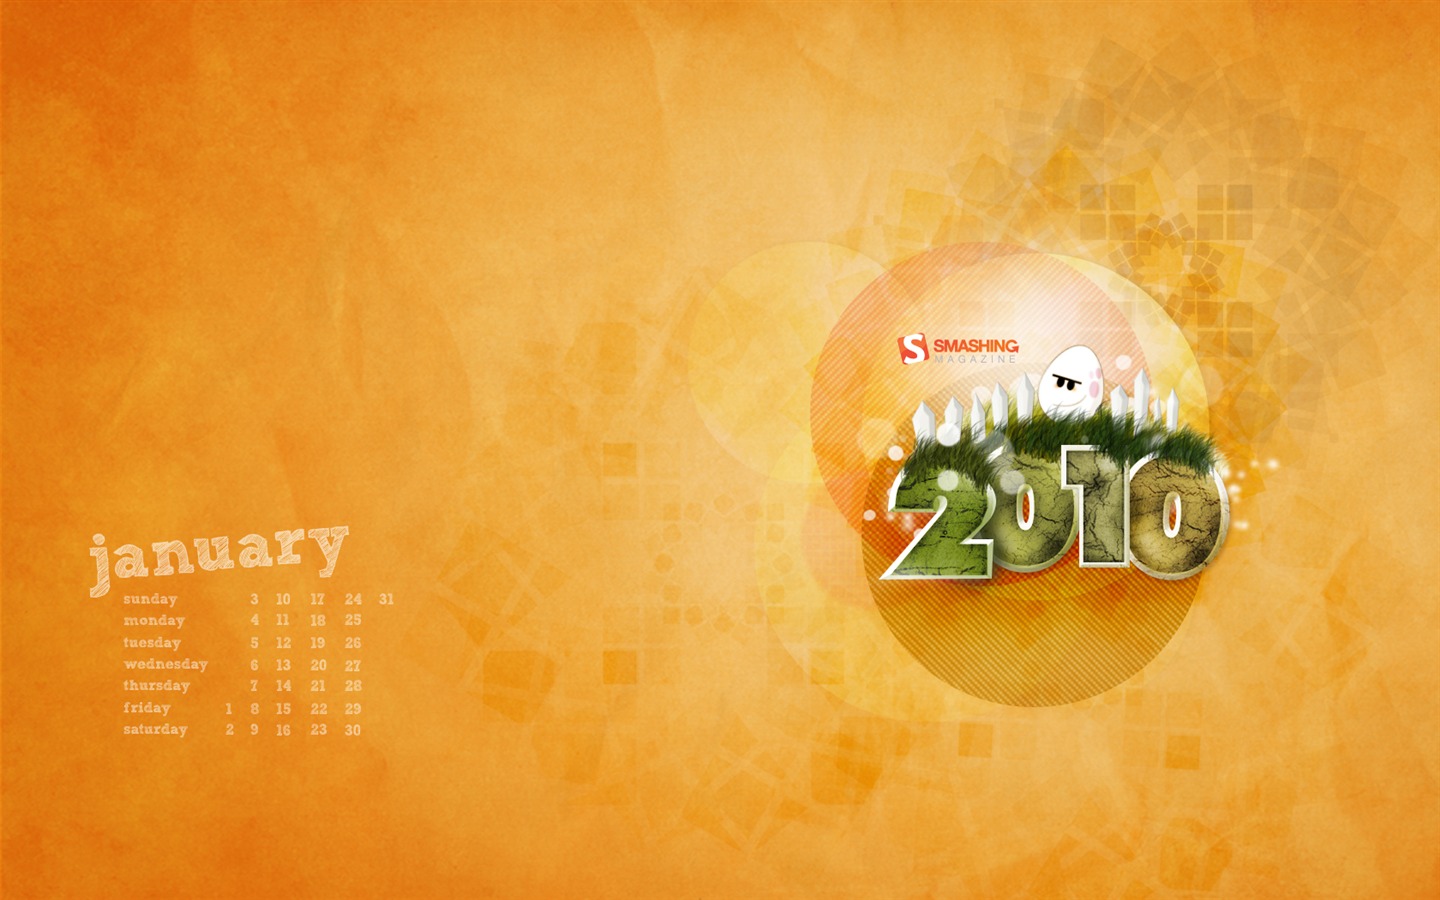 Microsoft Official Win7 New Year Wallpapers #8 - 1440x900